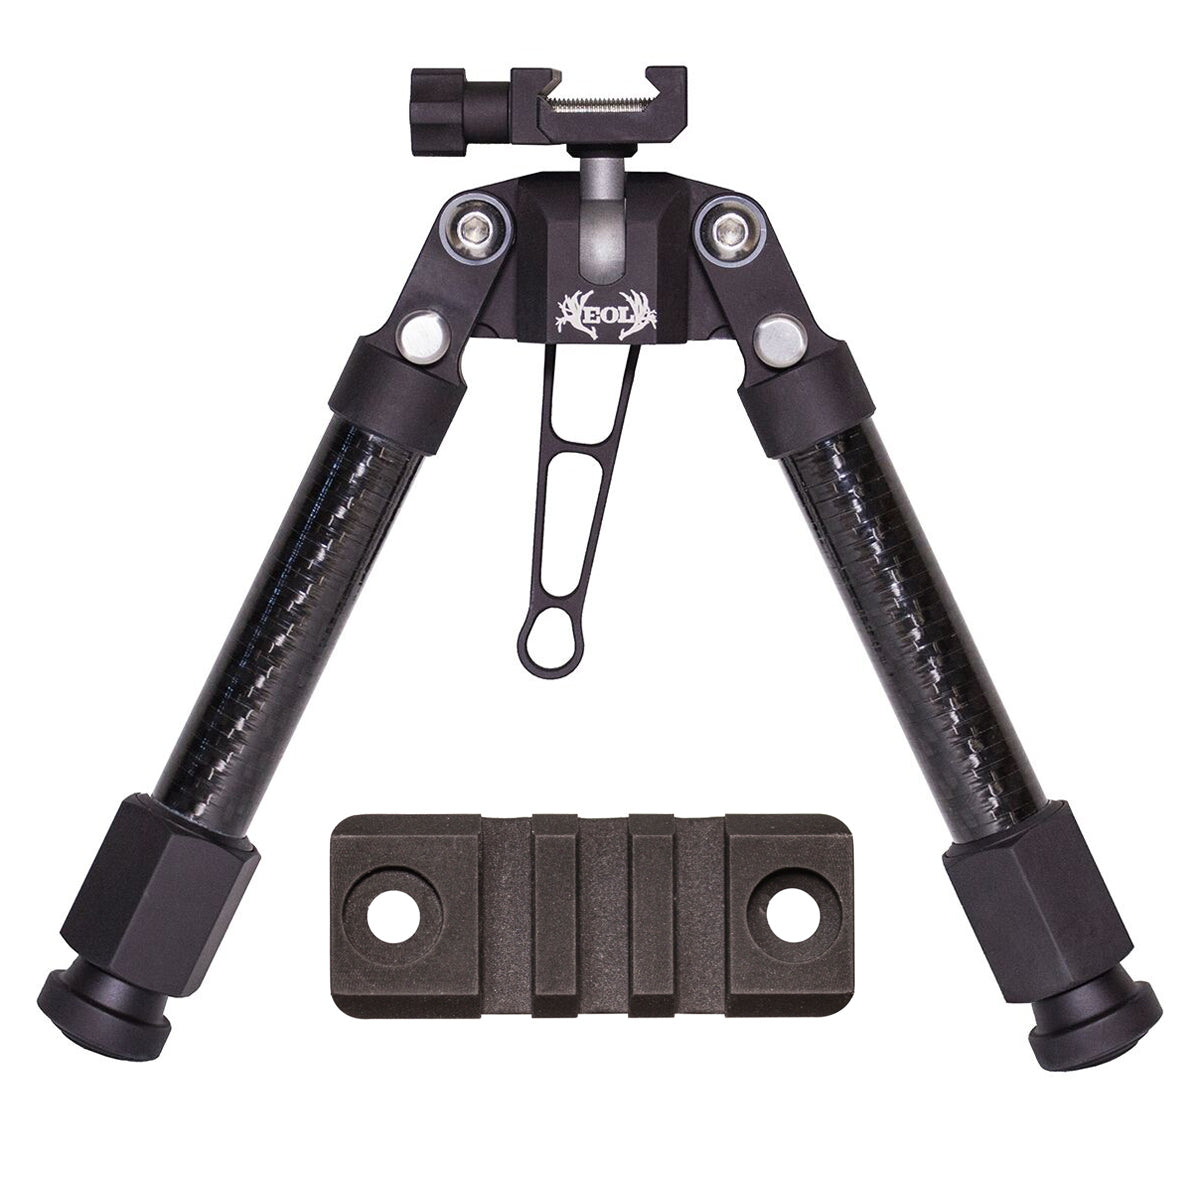 Rugged Ridge Outdoor Gear Extreme Bipod with Free Picatinny Rail in Rugged Ridge Outdoor Gear Extreme Bipod with Free Picatinny Rail by Rugged Ridge | Gear - goHUNT Shop by GOHUNT | Rugged Ridge - GOHUNT Shop